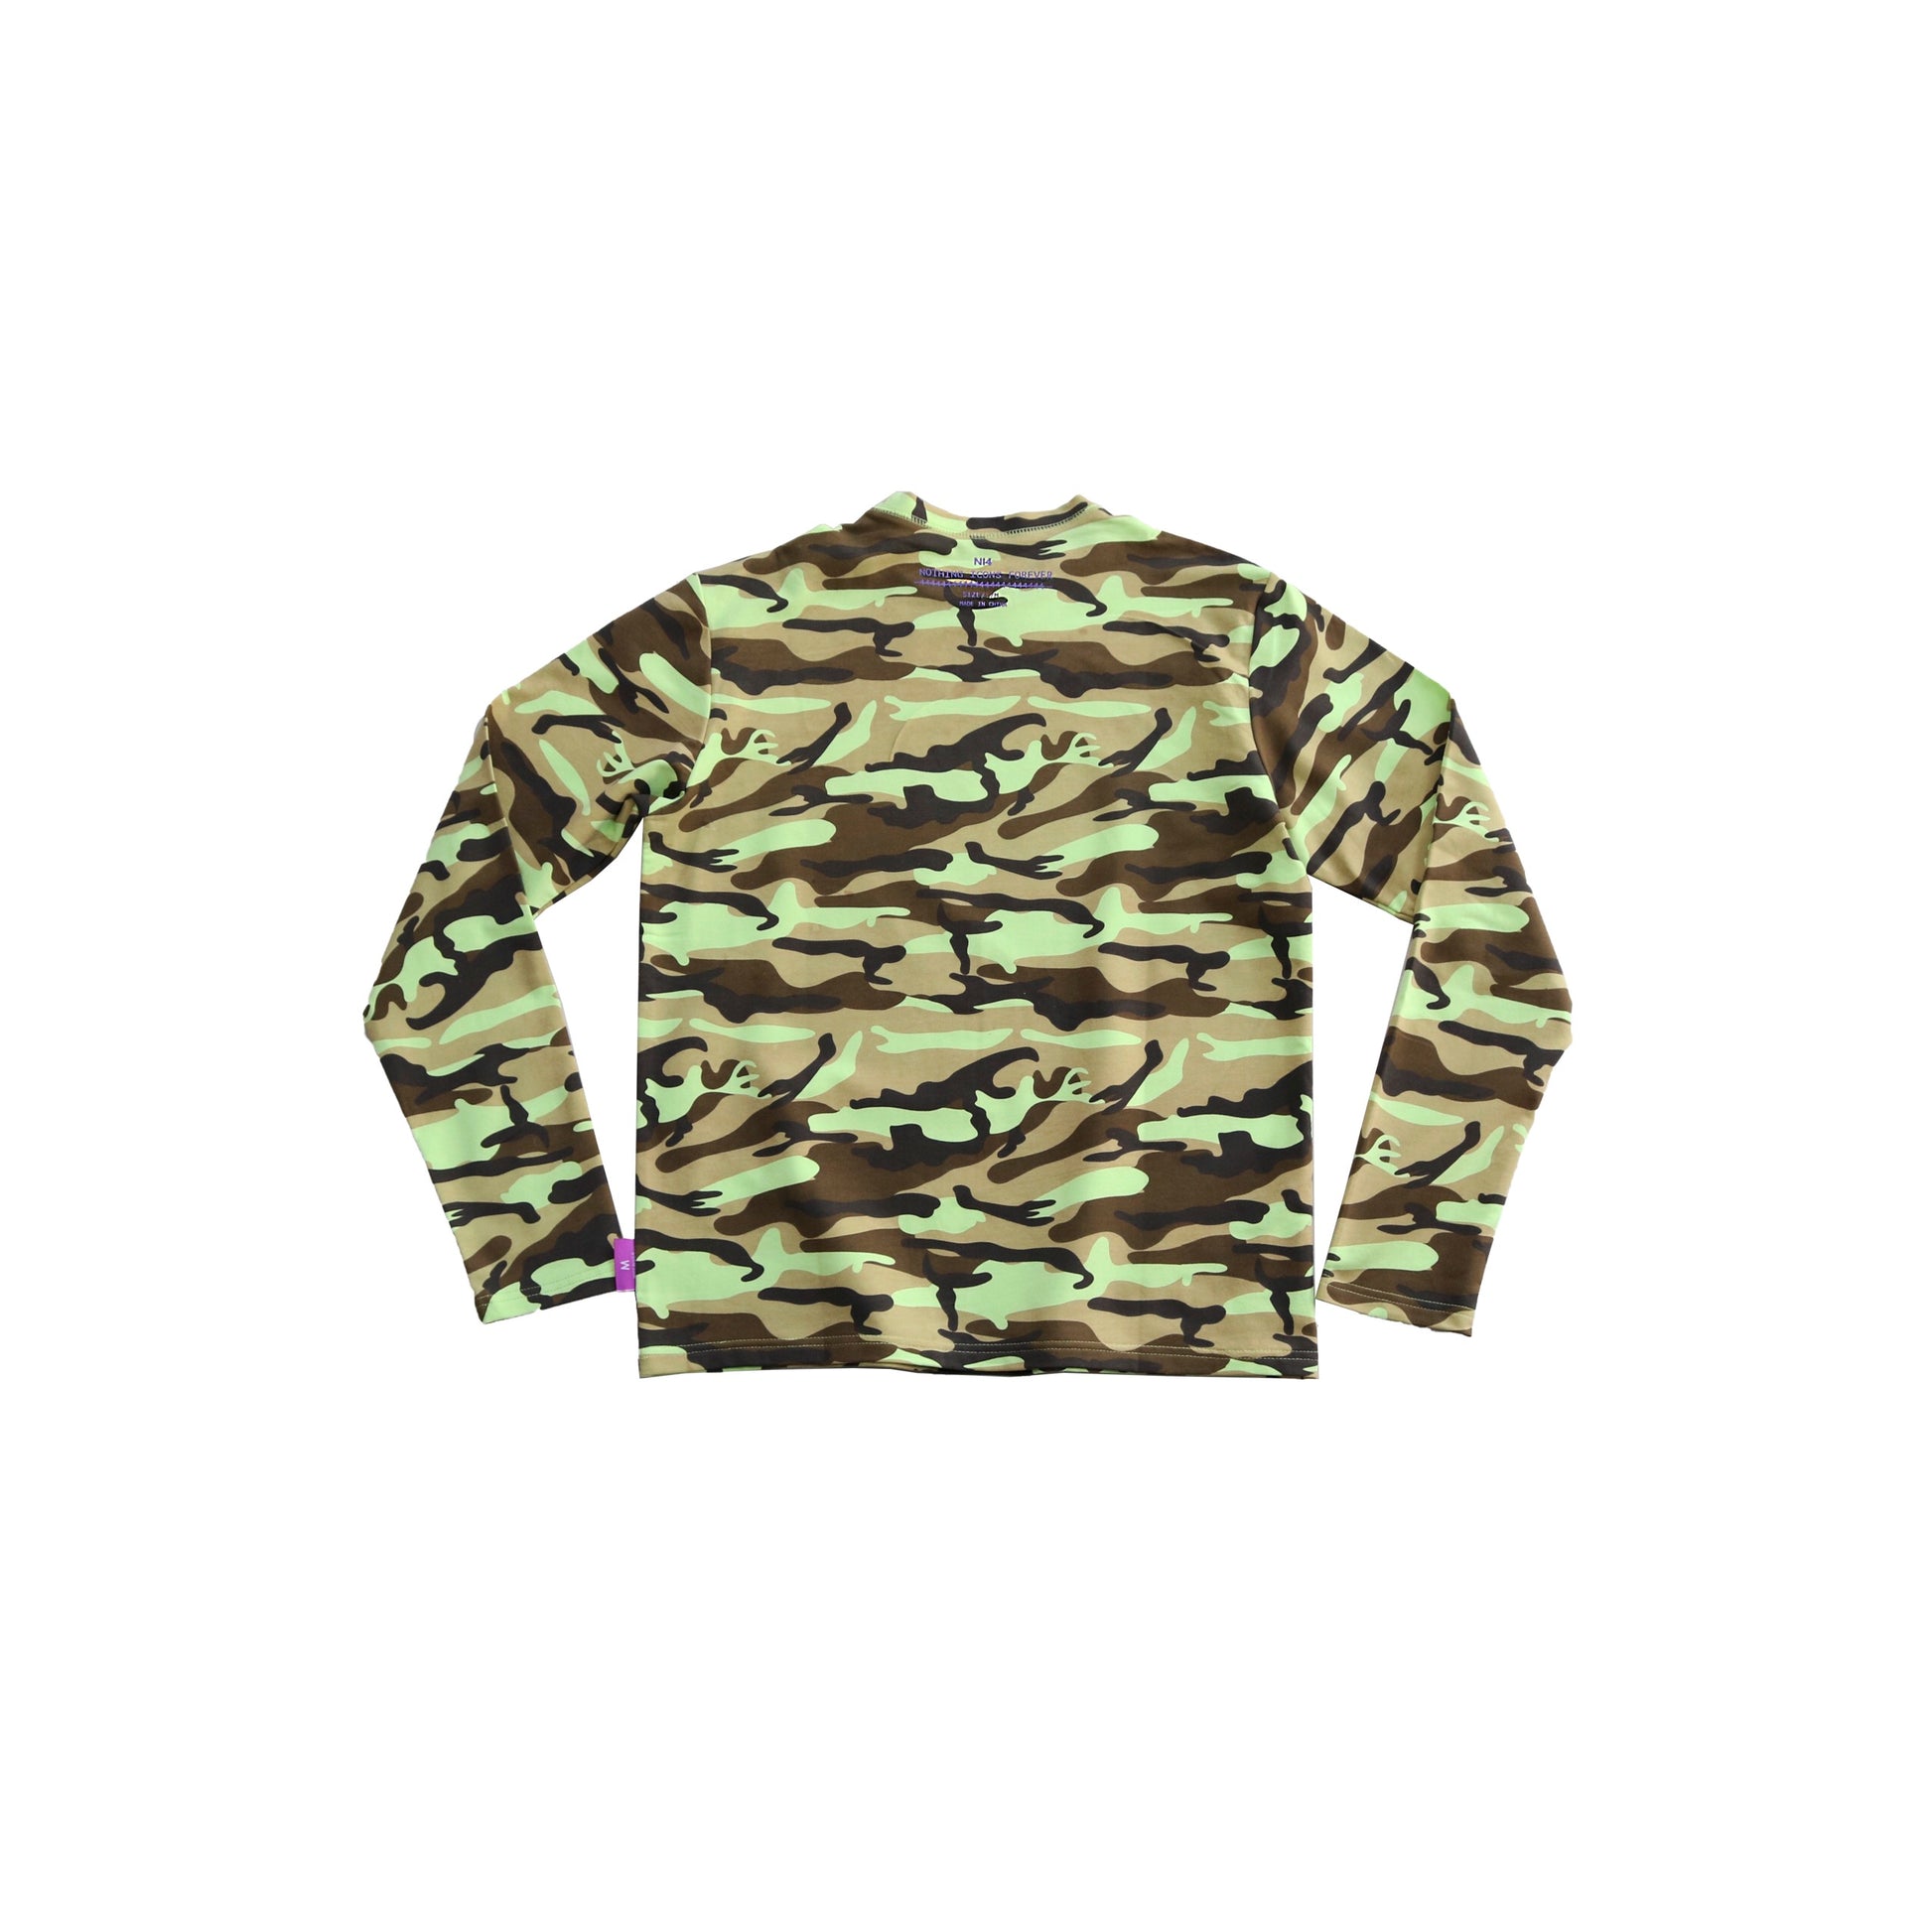 mens long sleeve camouflage t-shirt - 8586 